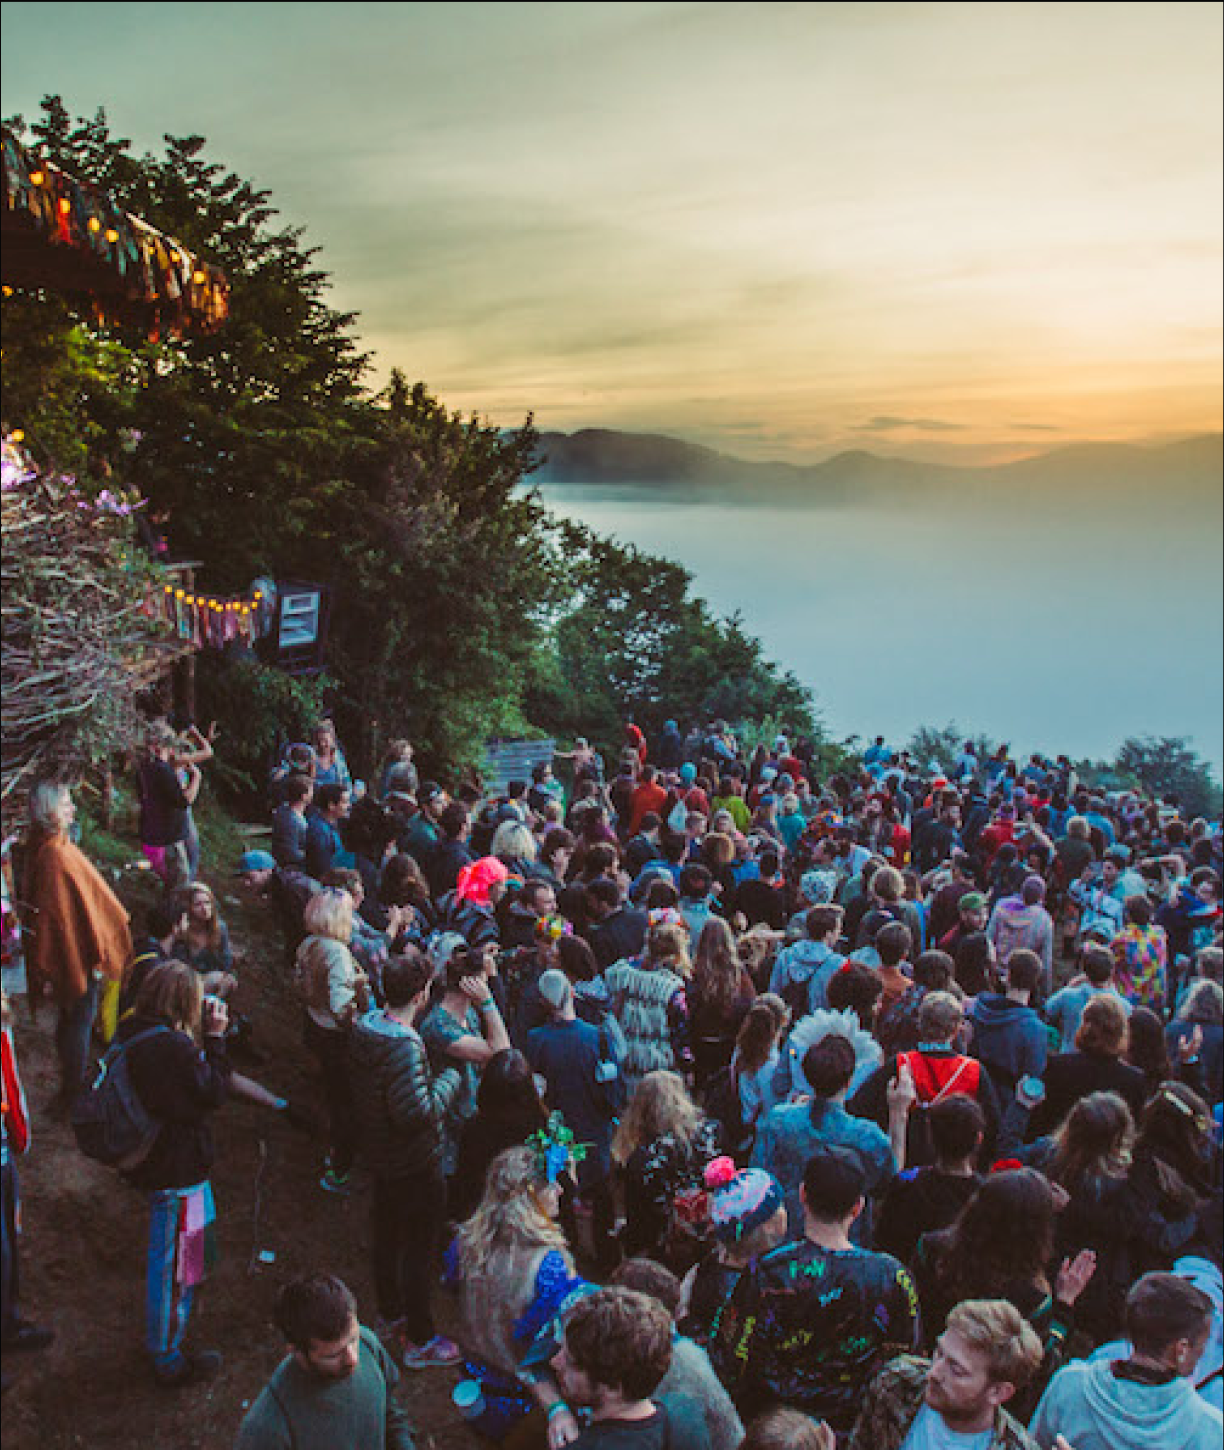 A festival crowd on a hilltop